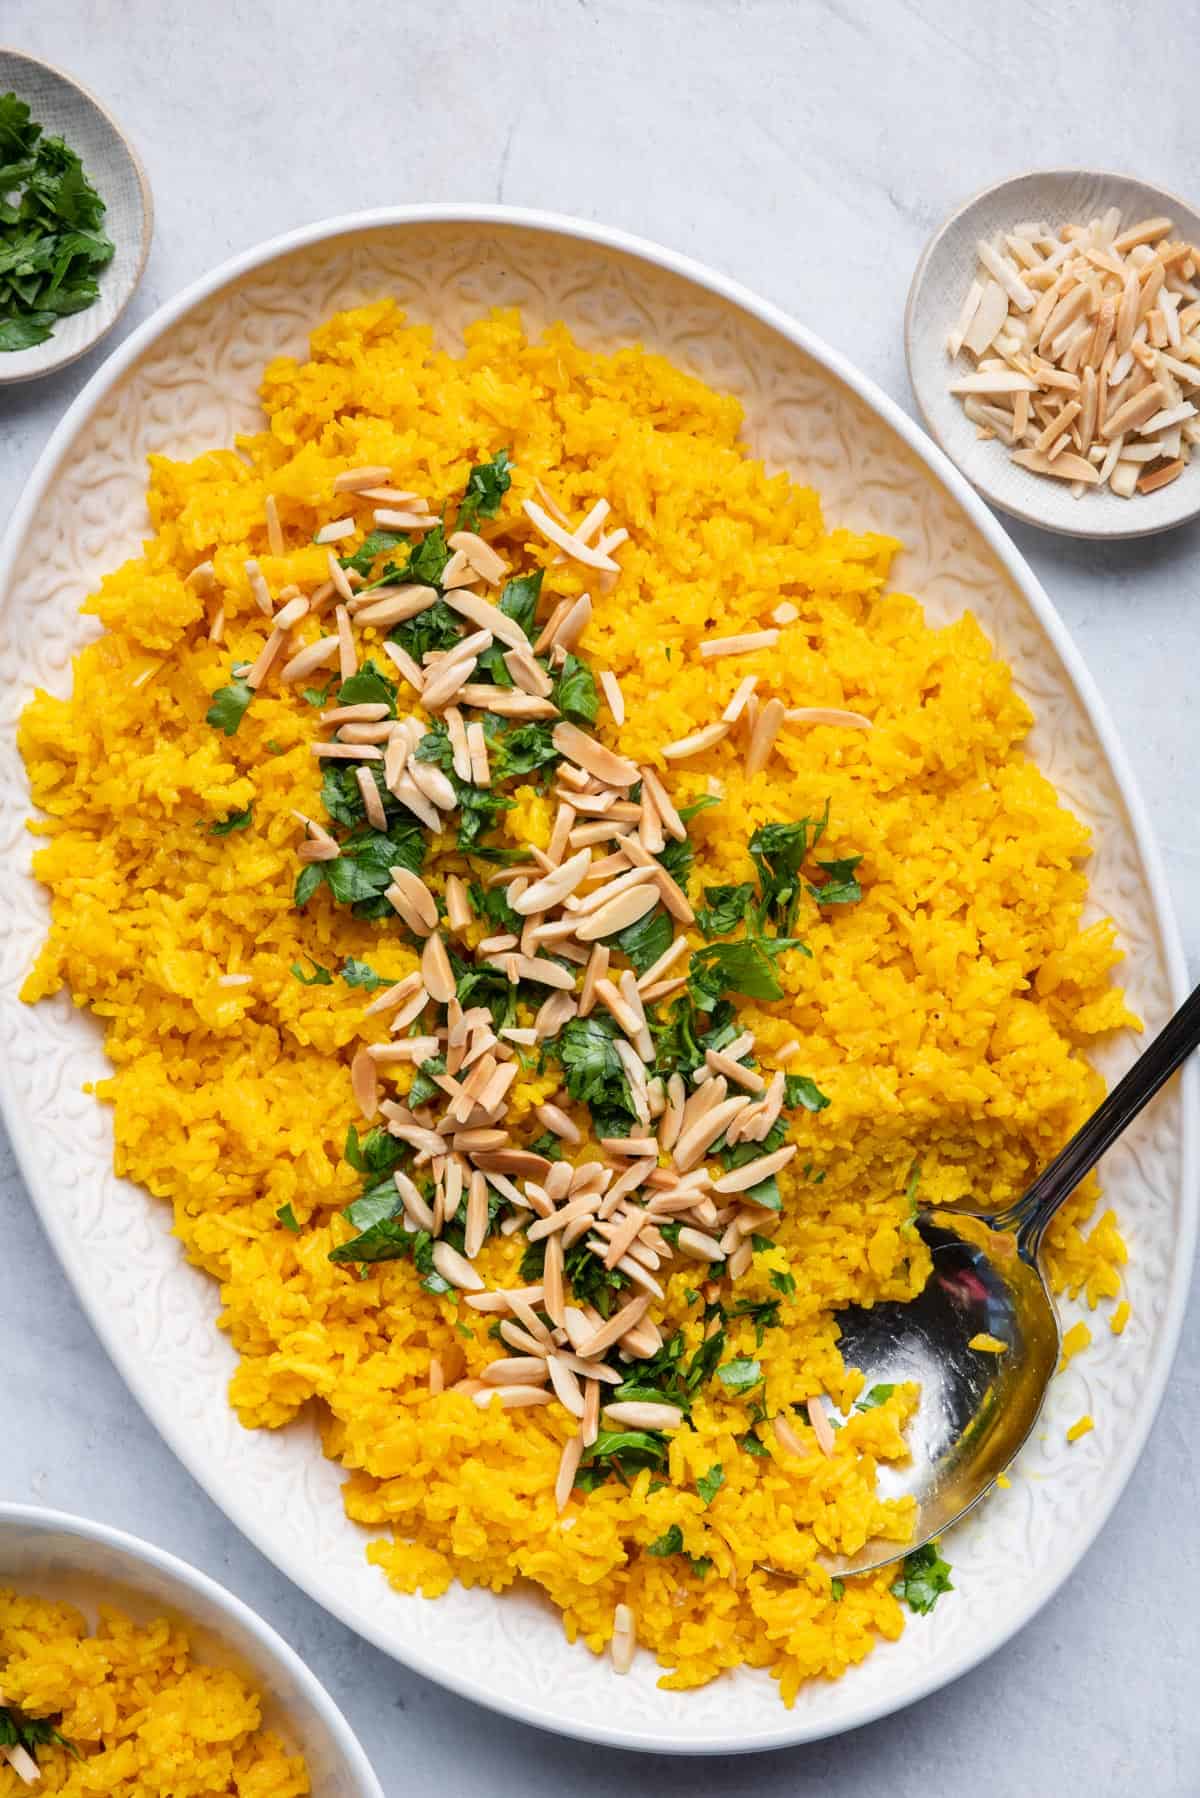 Turmeric rice with spoon inside for serving